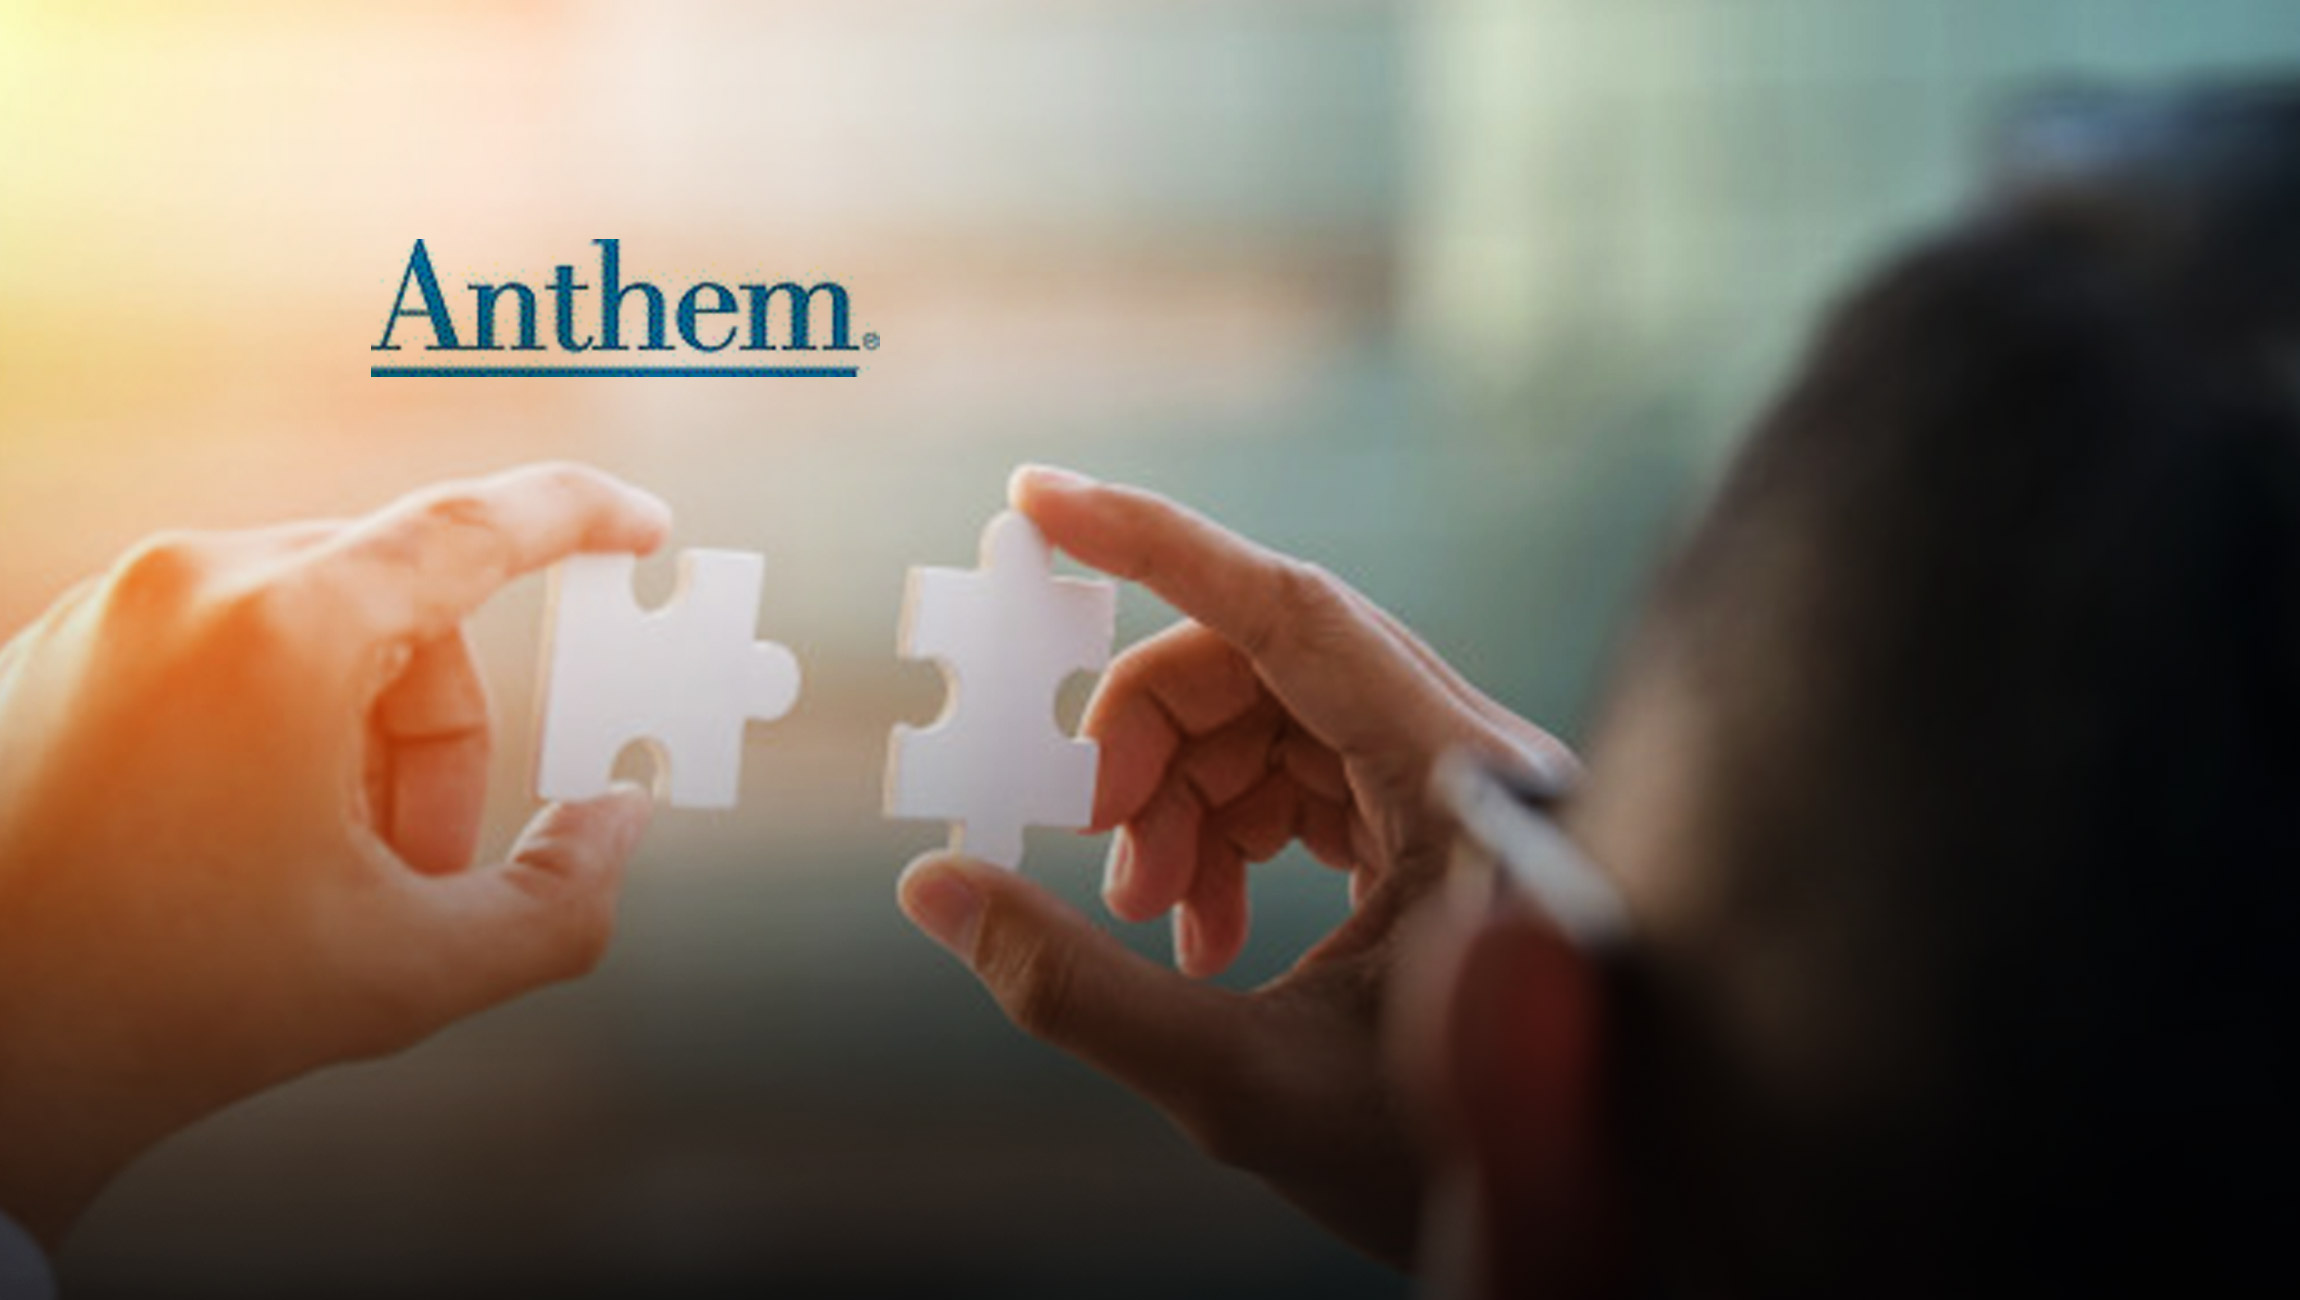 Anthem, Inc. Leads Collaboration to Develop Tools to Help Public Officials and Businesses Make Informed Decisions Related to COVID-19